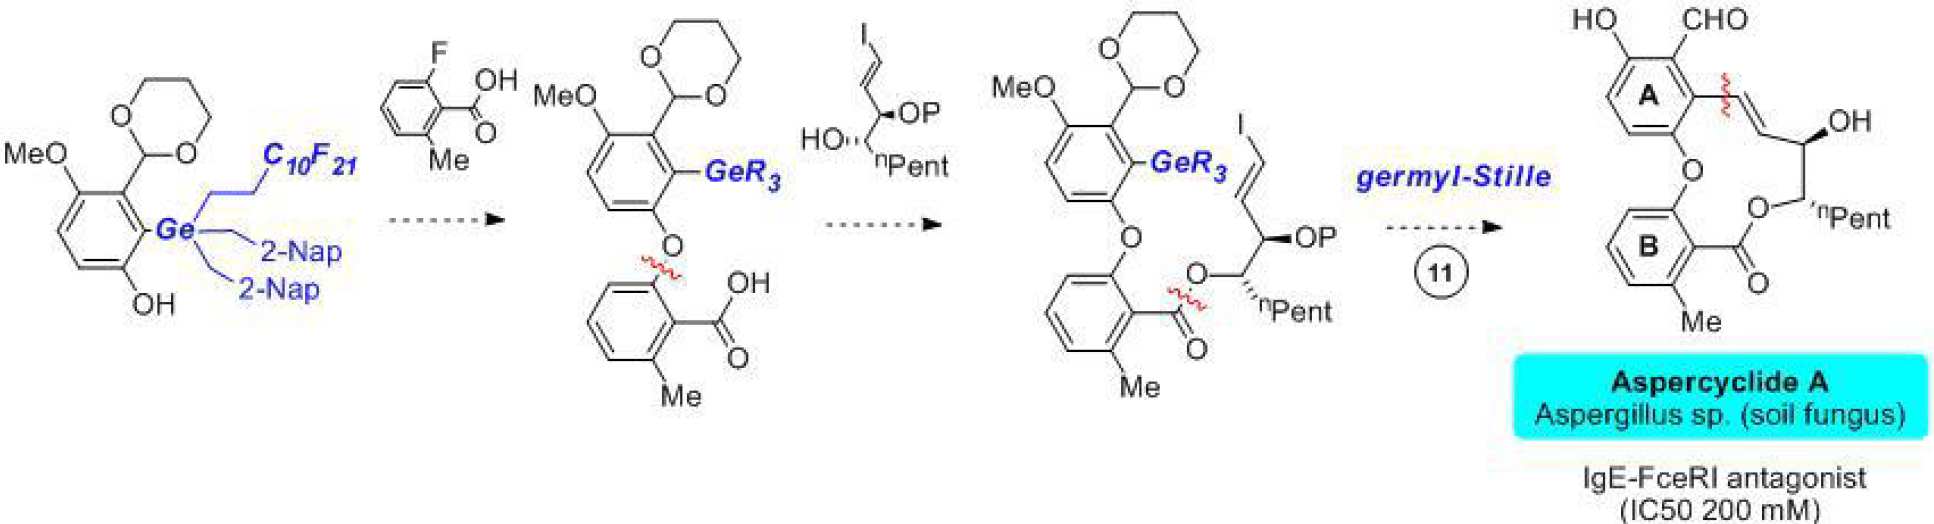 Our approach to the synthesis of aspercyclide A